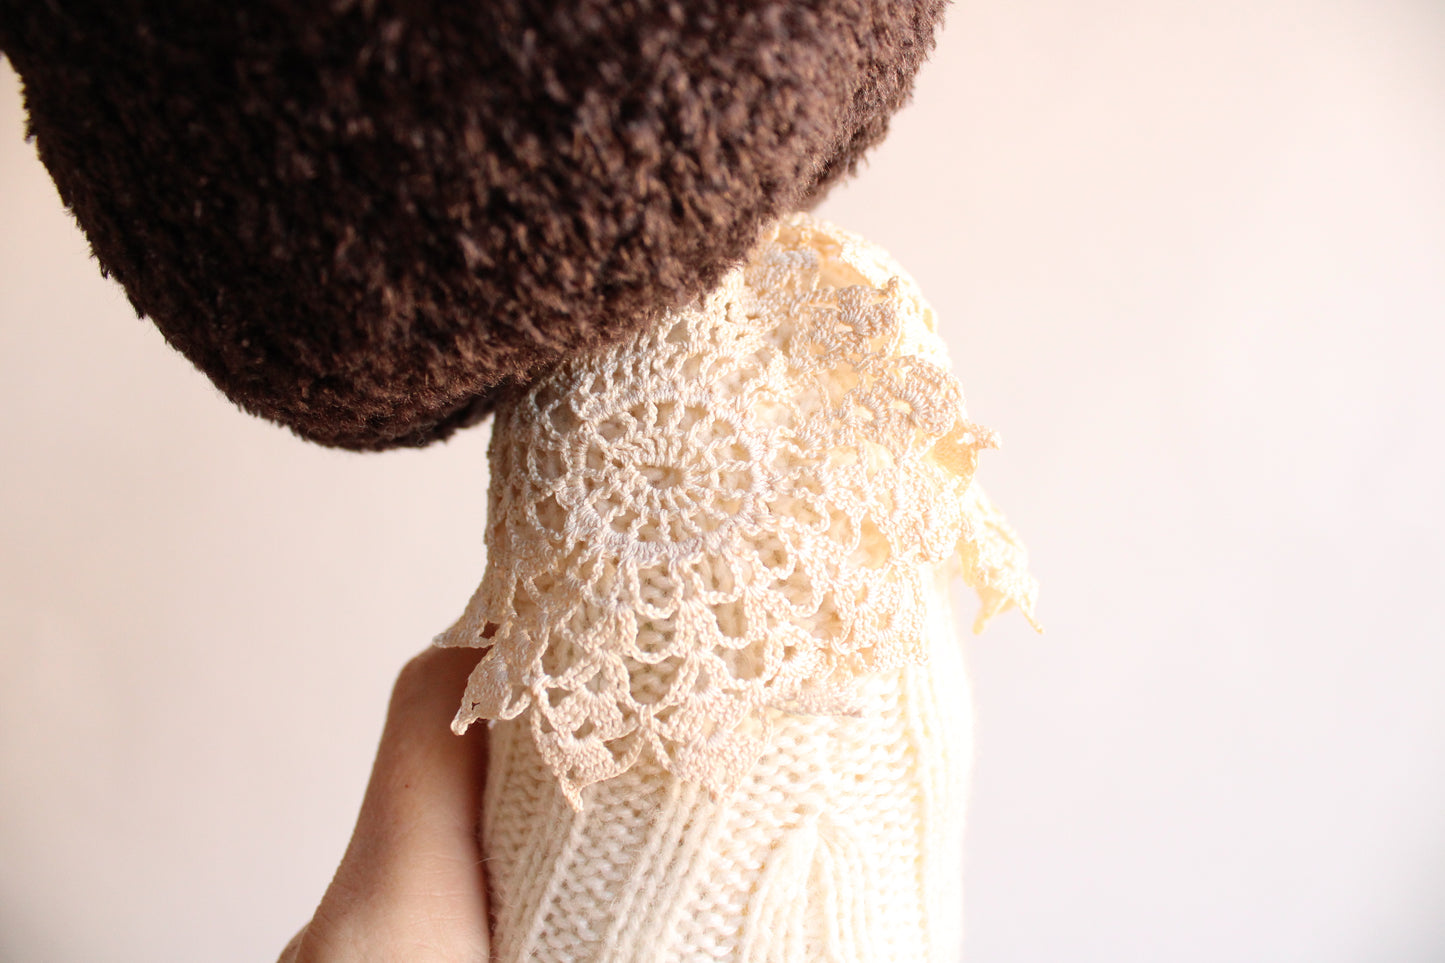 "Victorian Woods" Handcrafted Sweater Toadstool with Vintage Lace